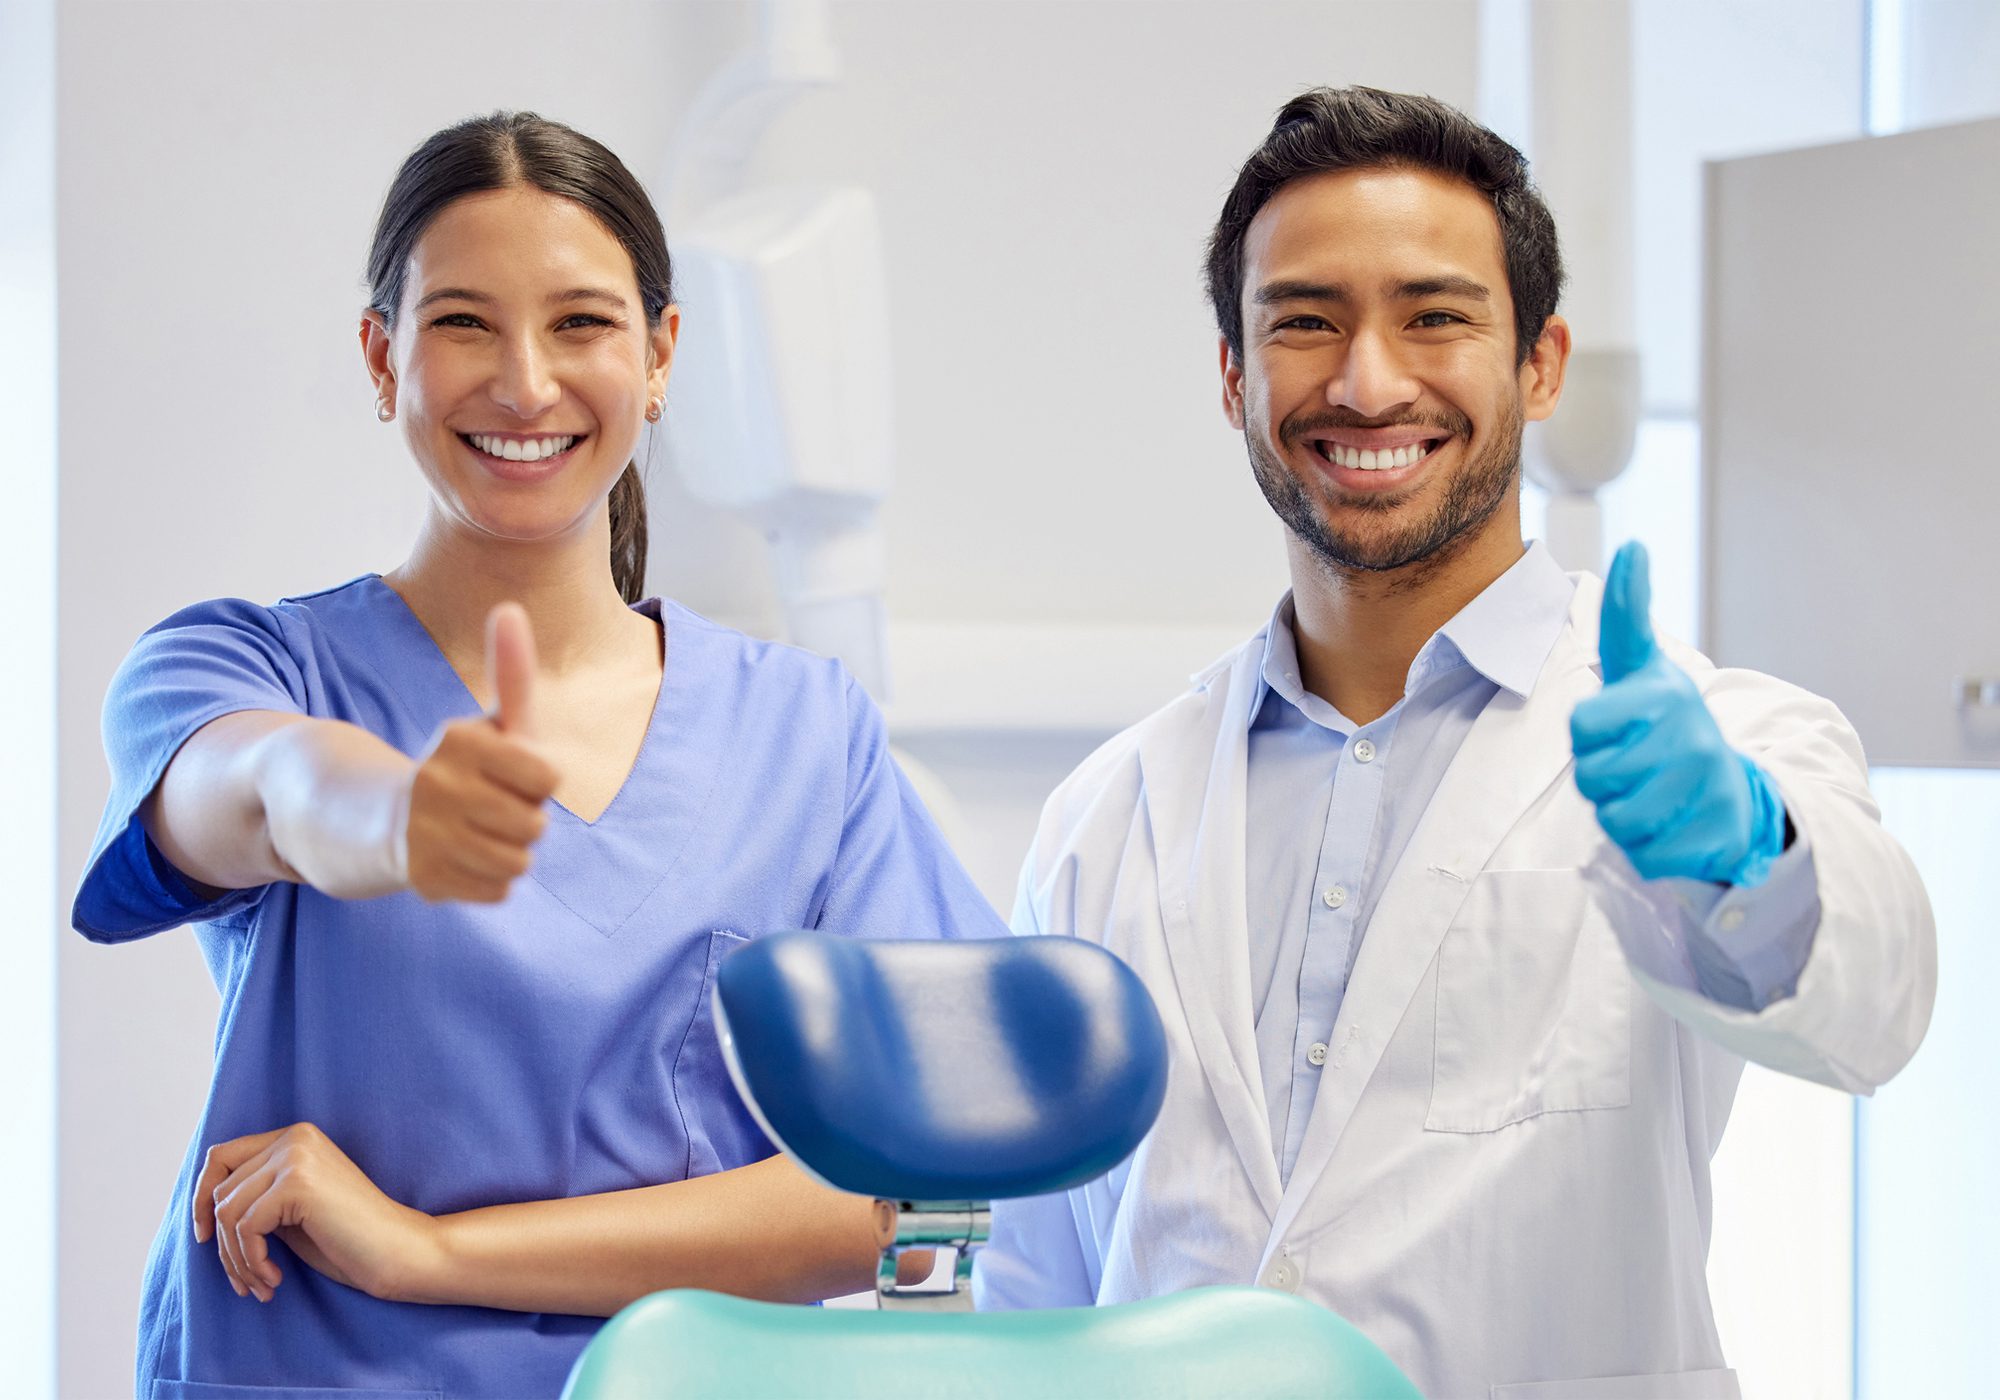 how to humanize dental staff